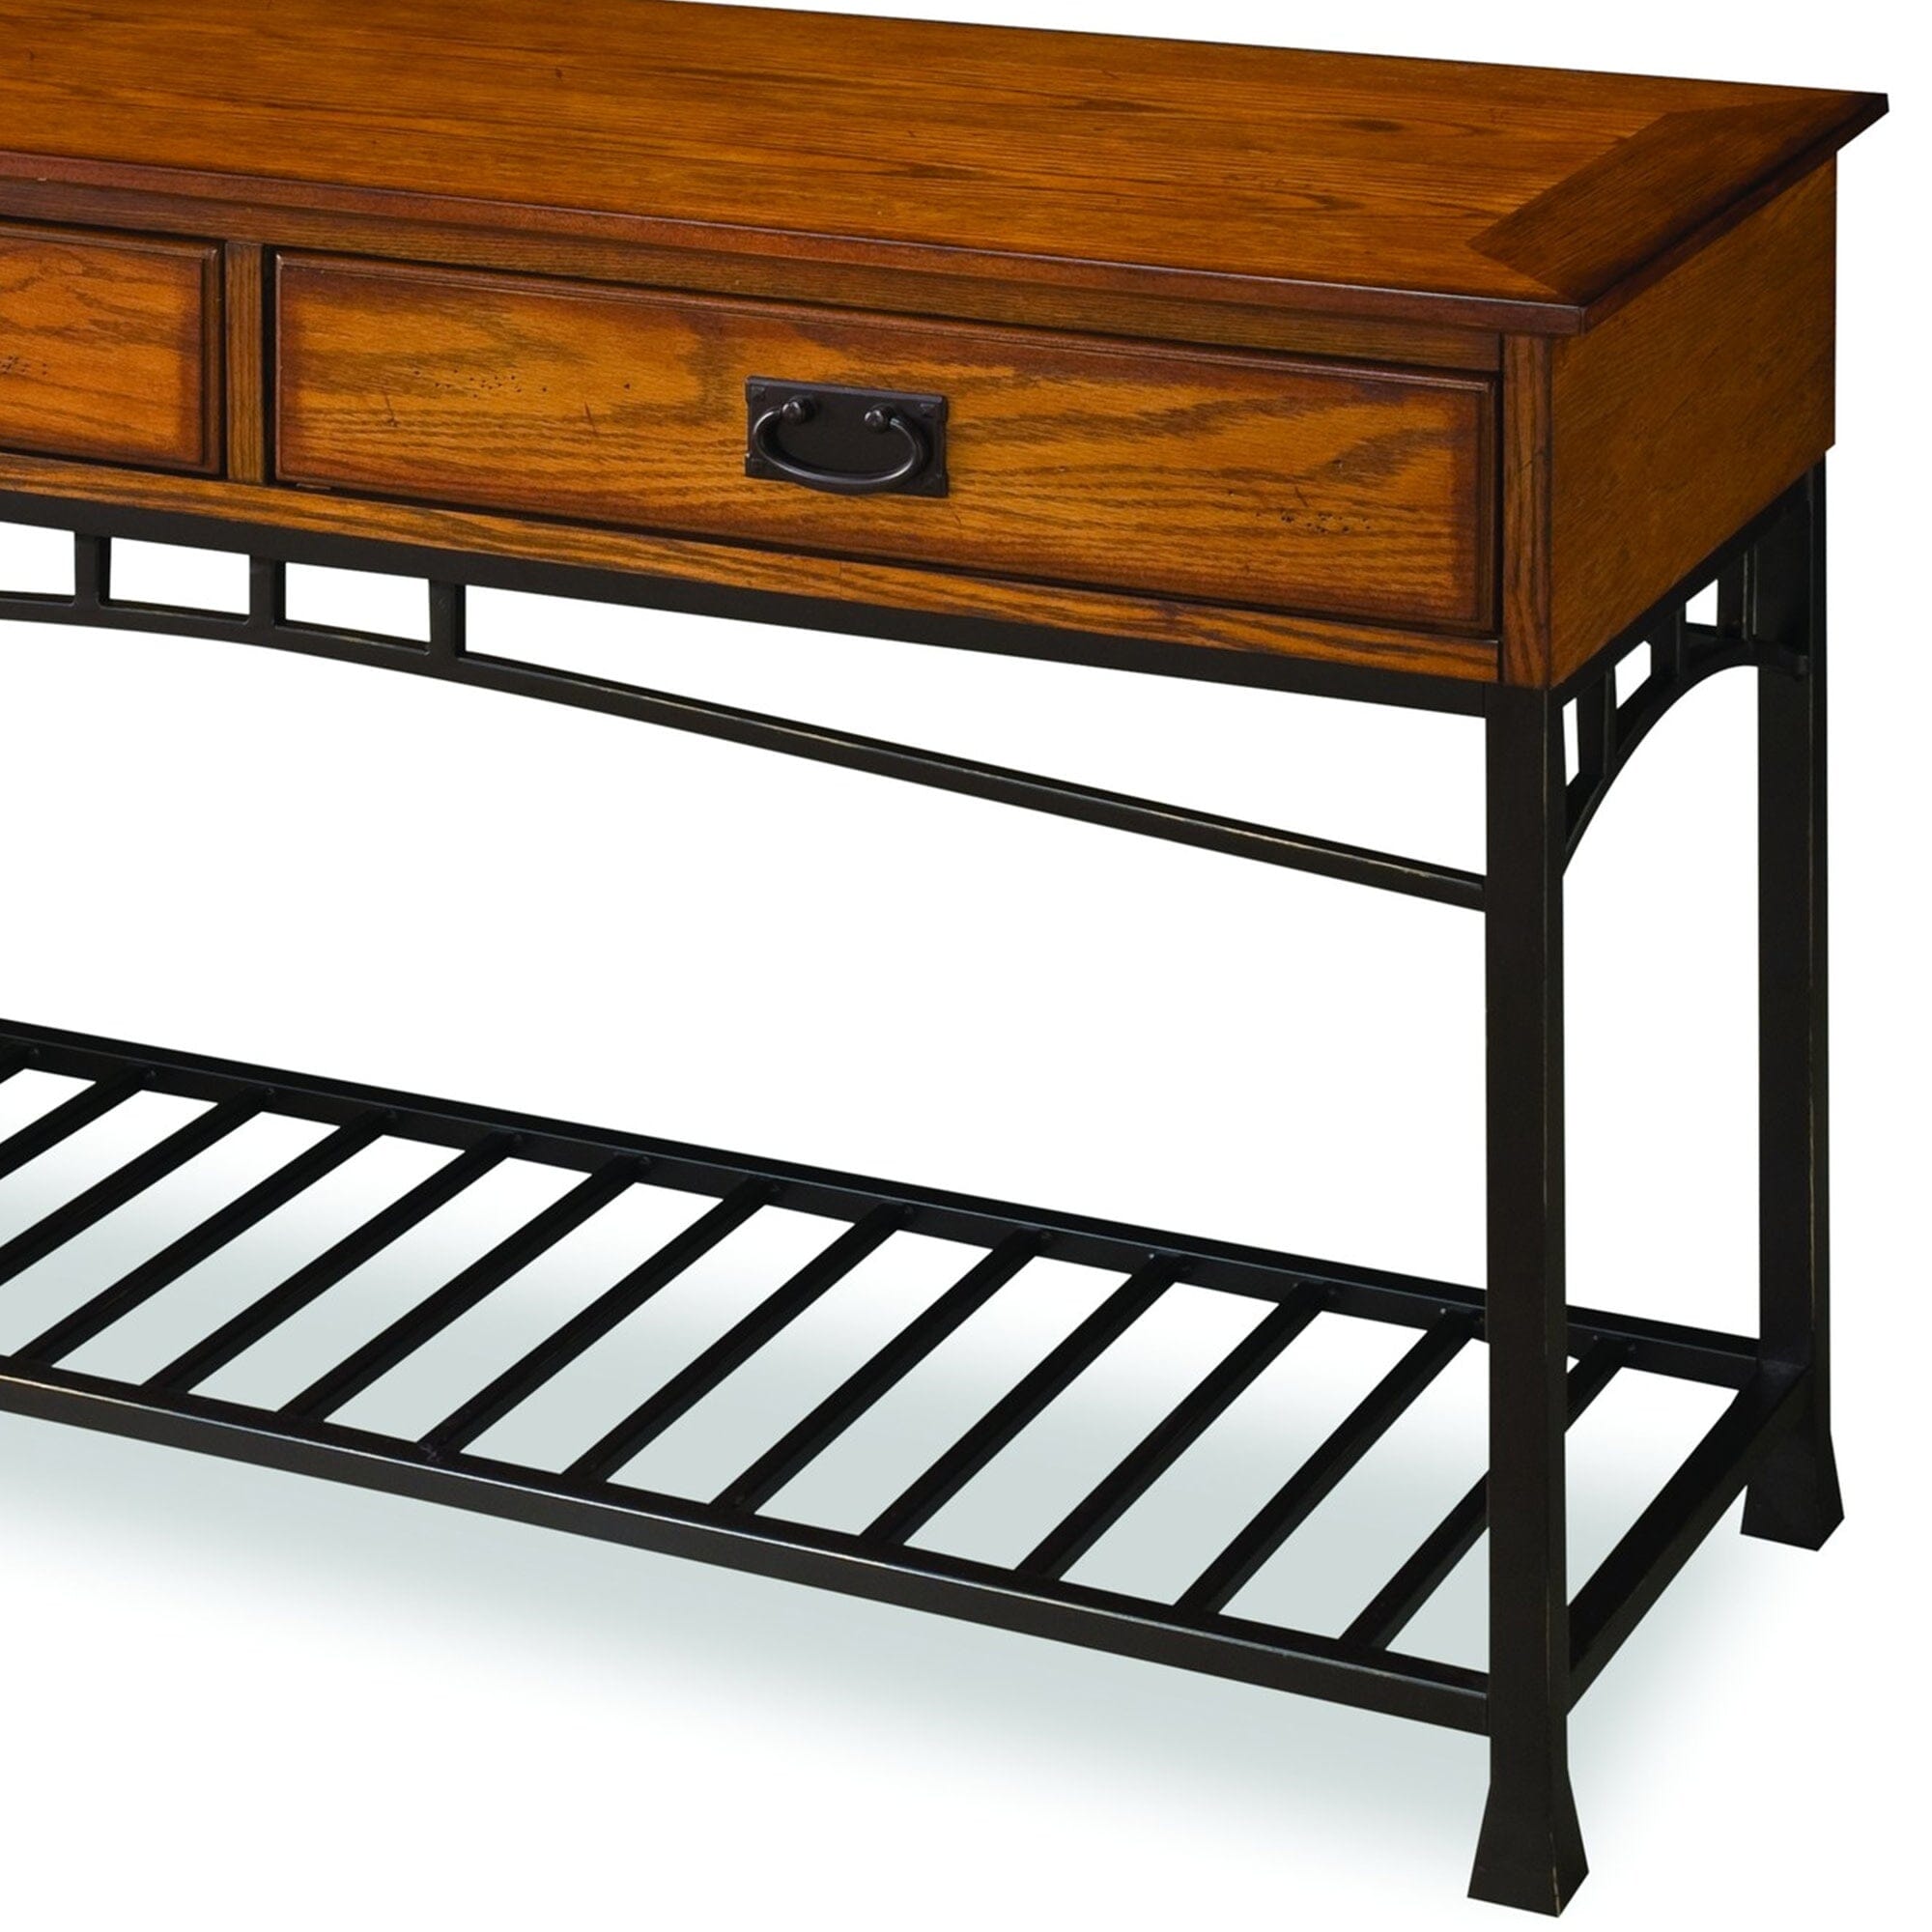 Traditional Console Table By Modern Craftsman Console Table Modern Craftsman